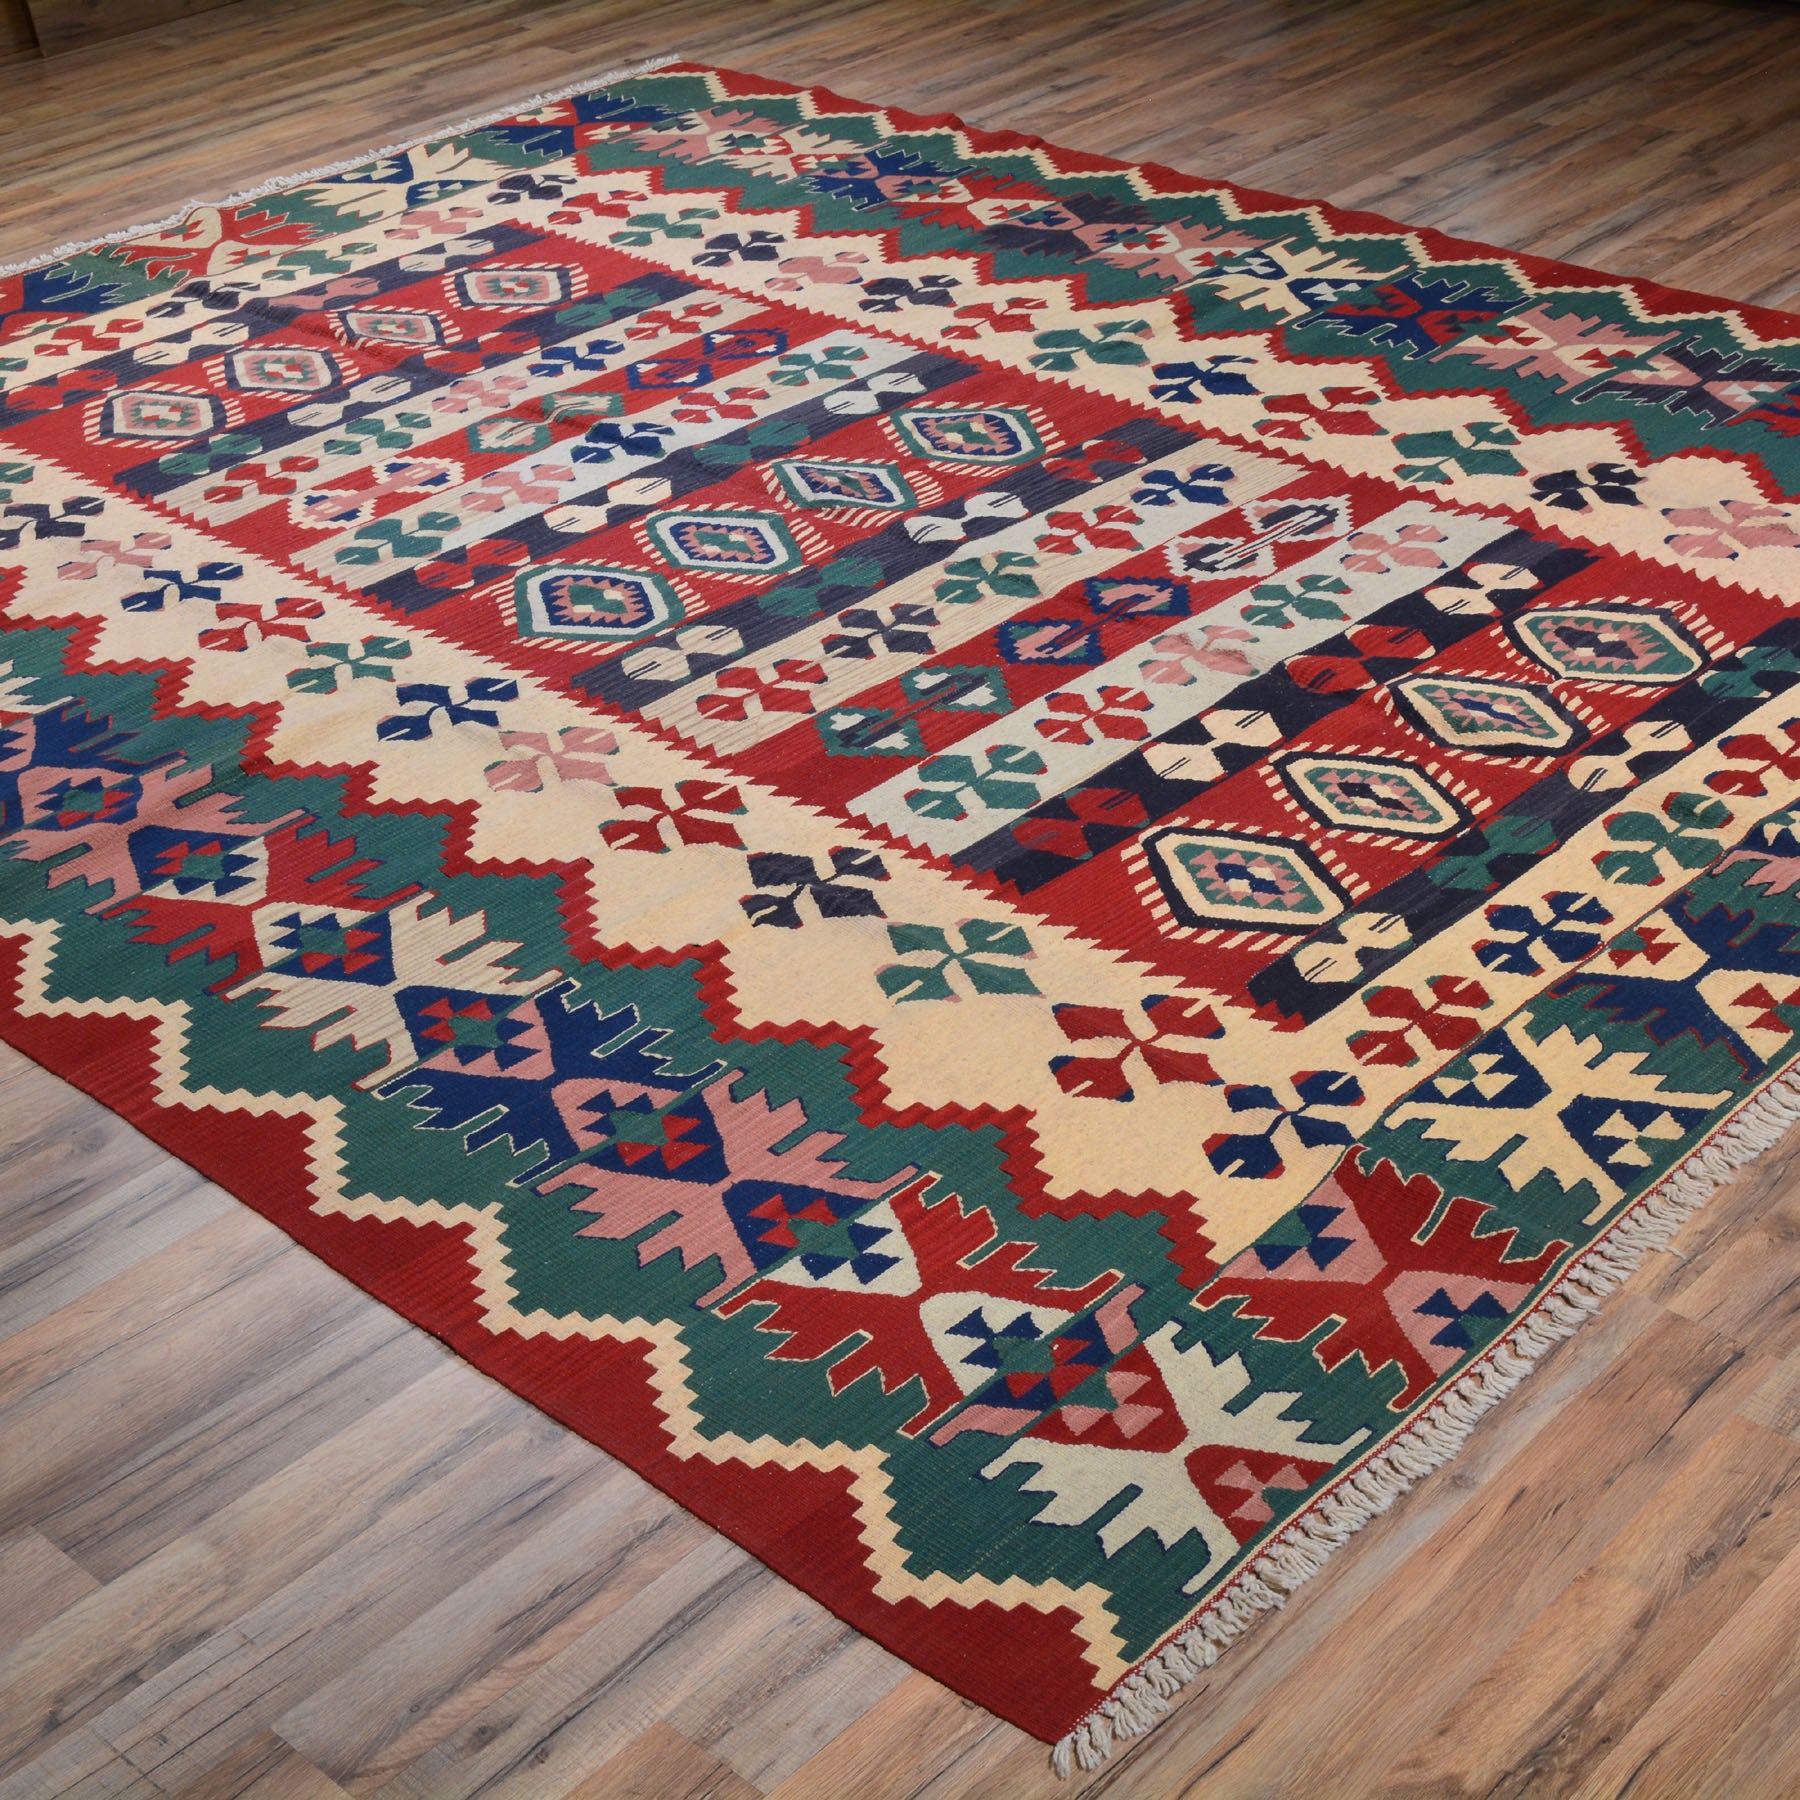 Sold at Auction: Hand Knotted Kilm Rug 4x3 ft